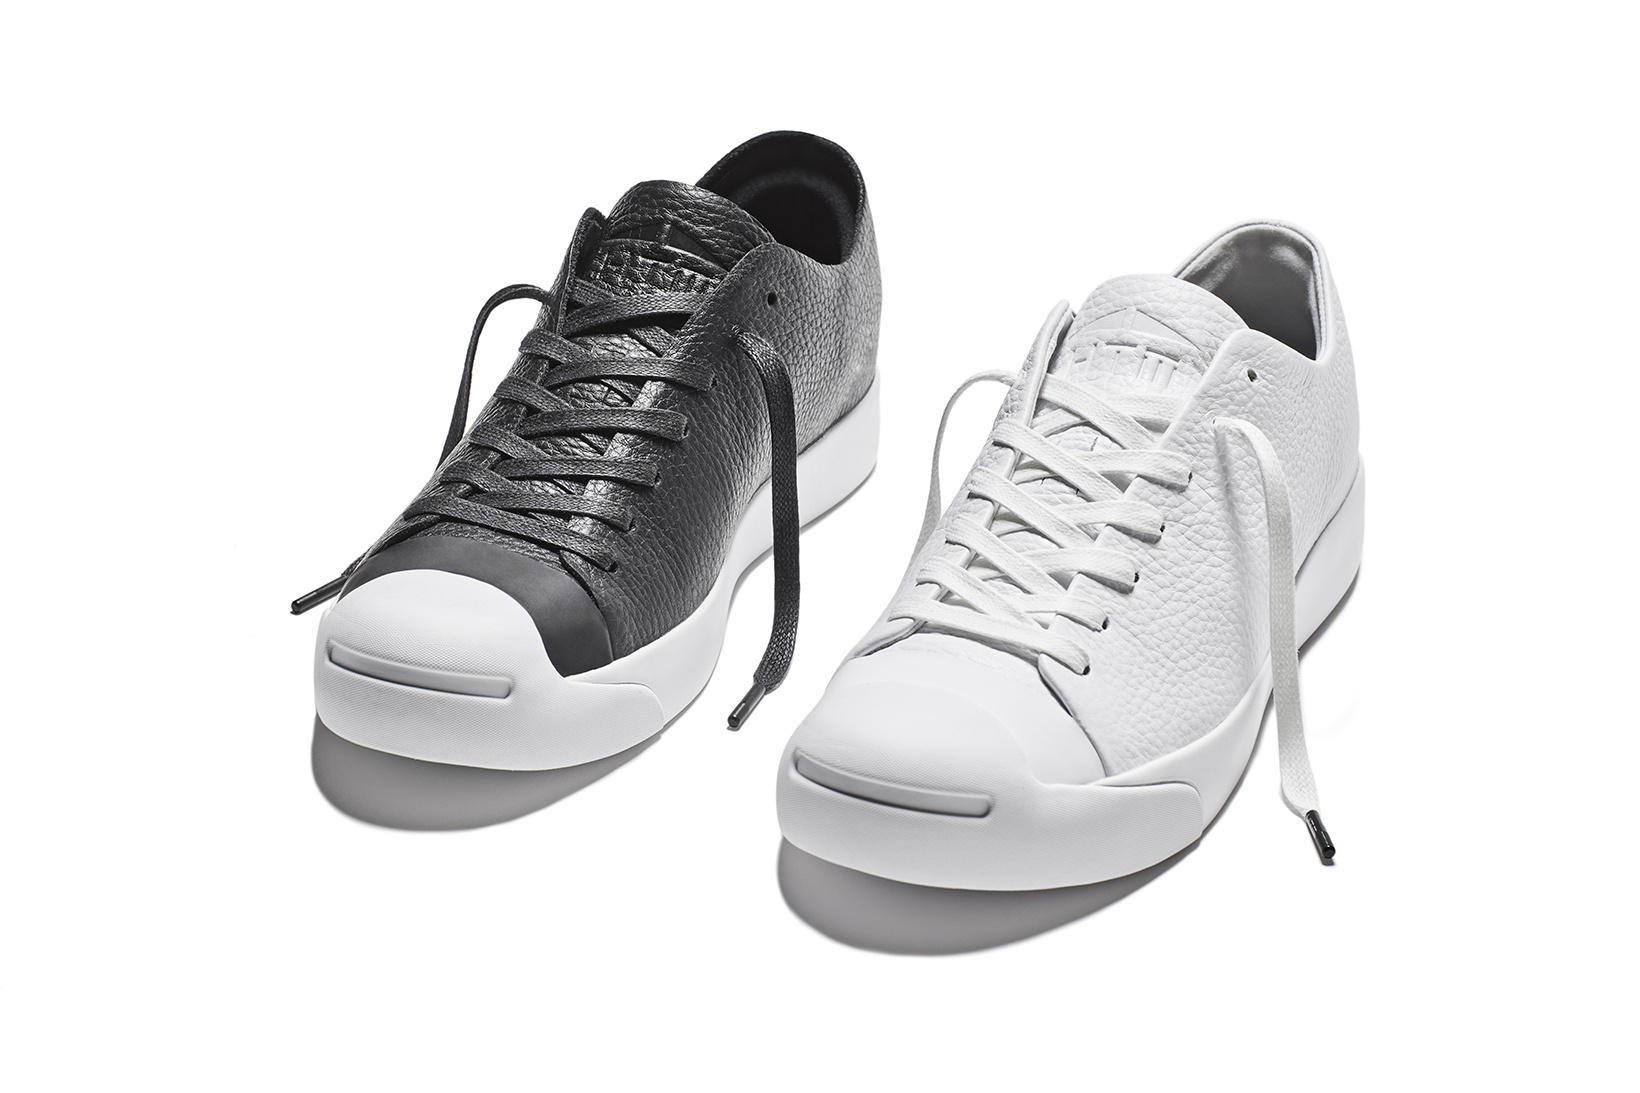 converse-htm-jack-purcell-modern-02